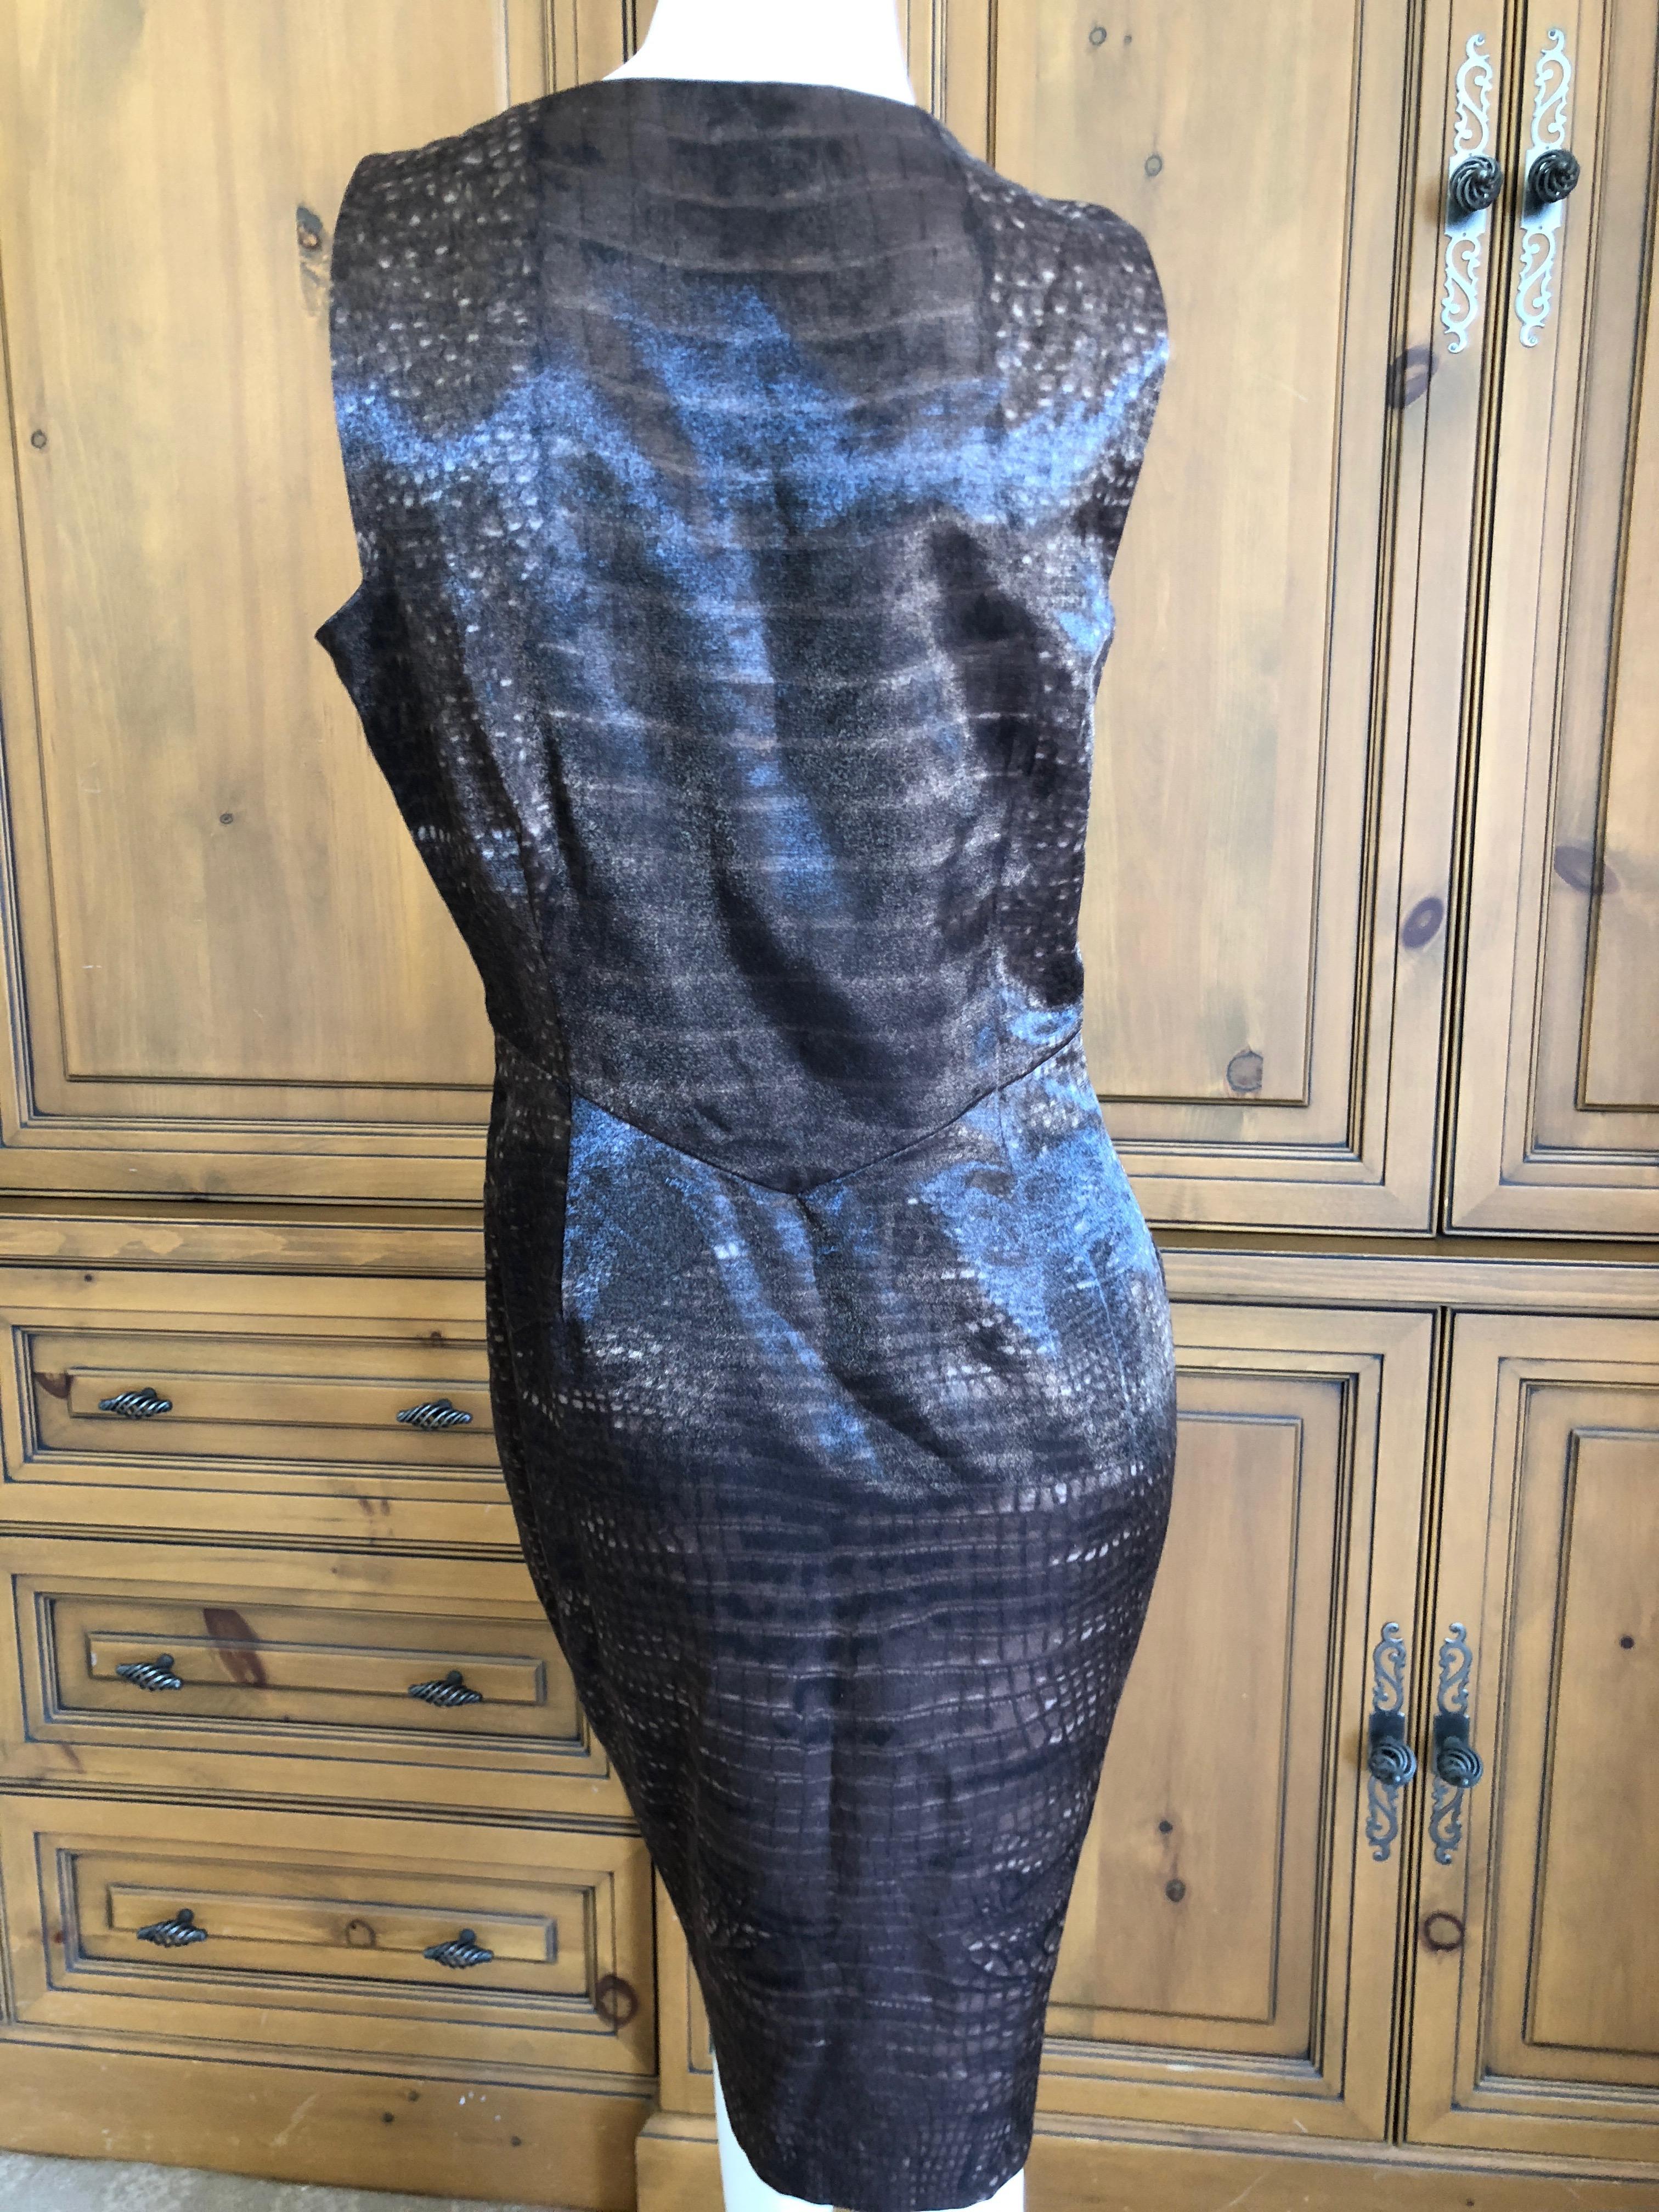 John Galliano Alligator Print Jacquard Dress and Matched Cashmere Sweater, 1990s For Sale 9